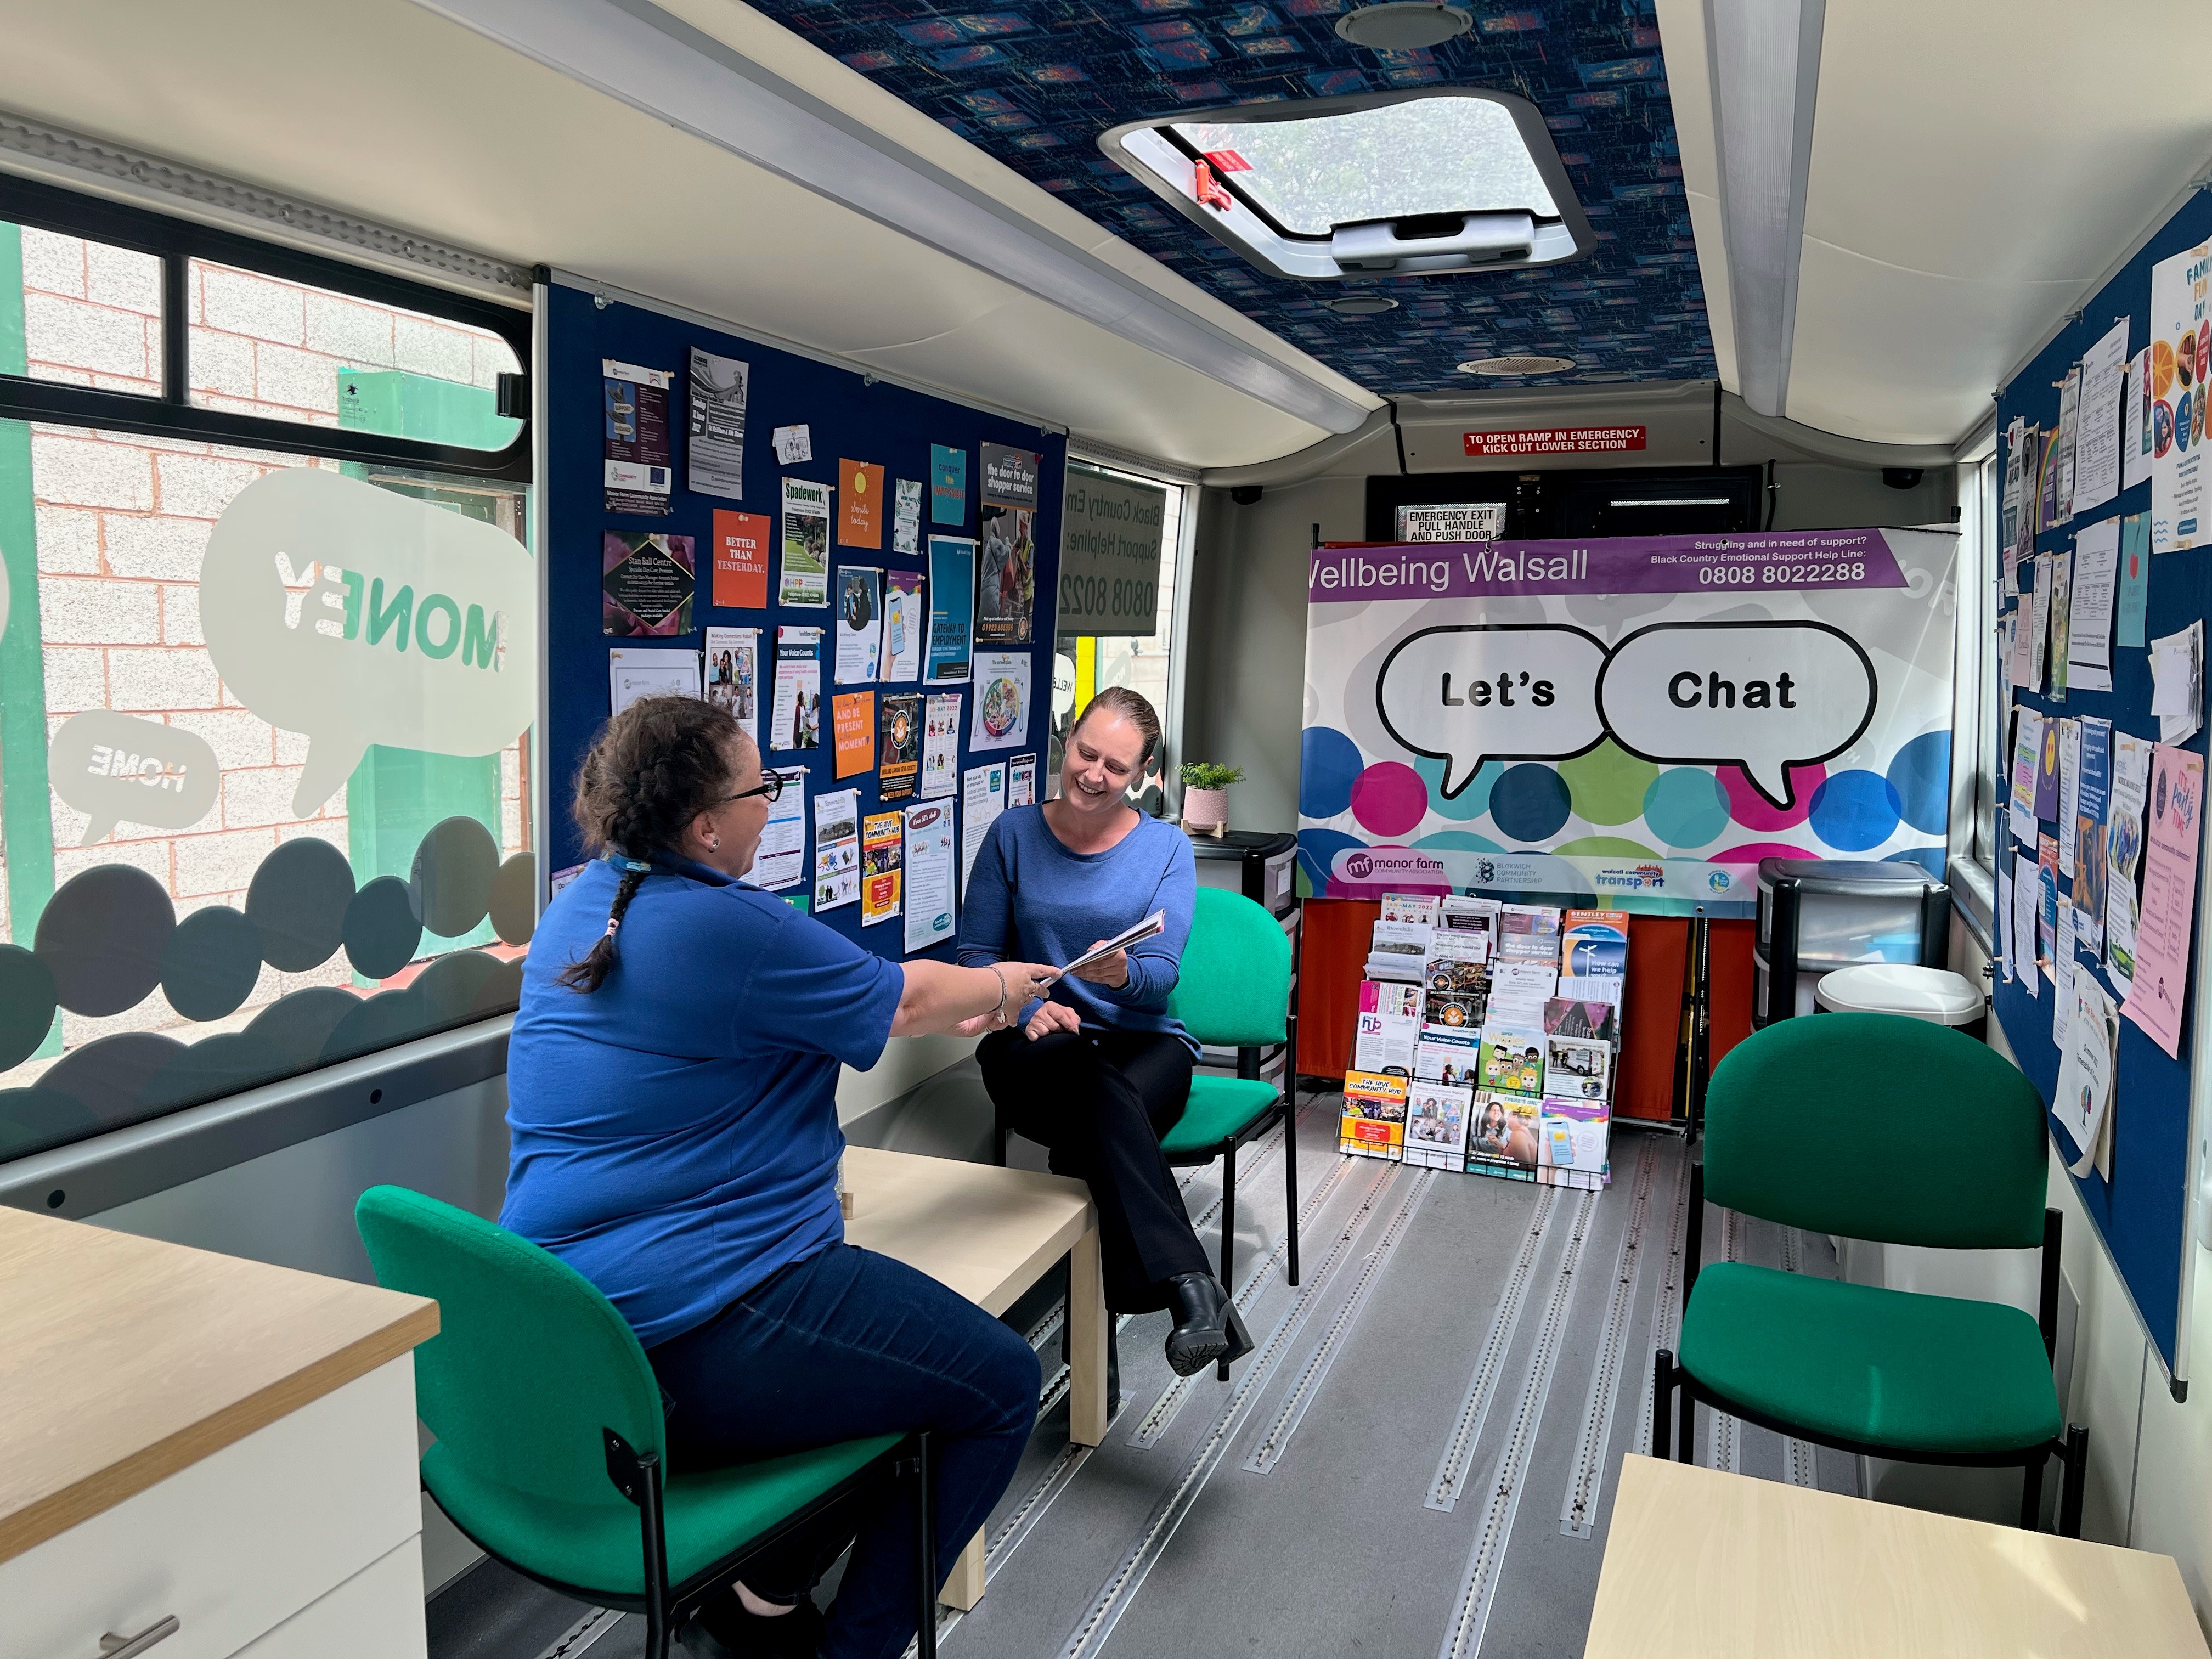 One of the Let's Chat buses offering a focal point for conversations, advice and assistance for people at risk of loneliness